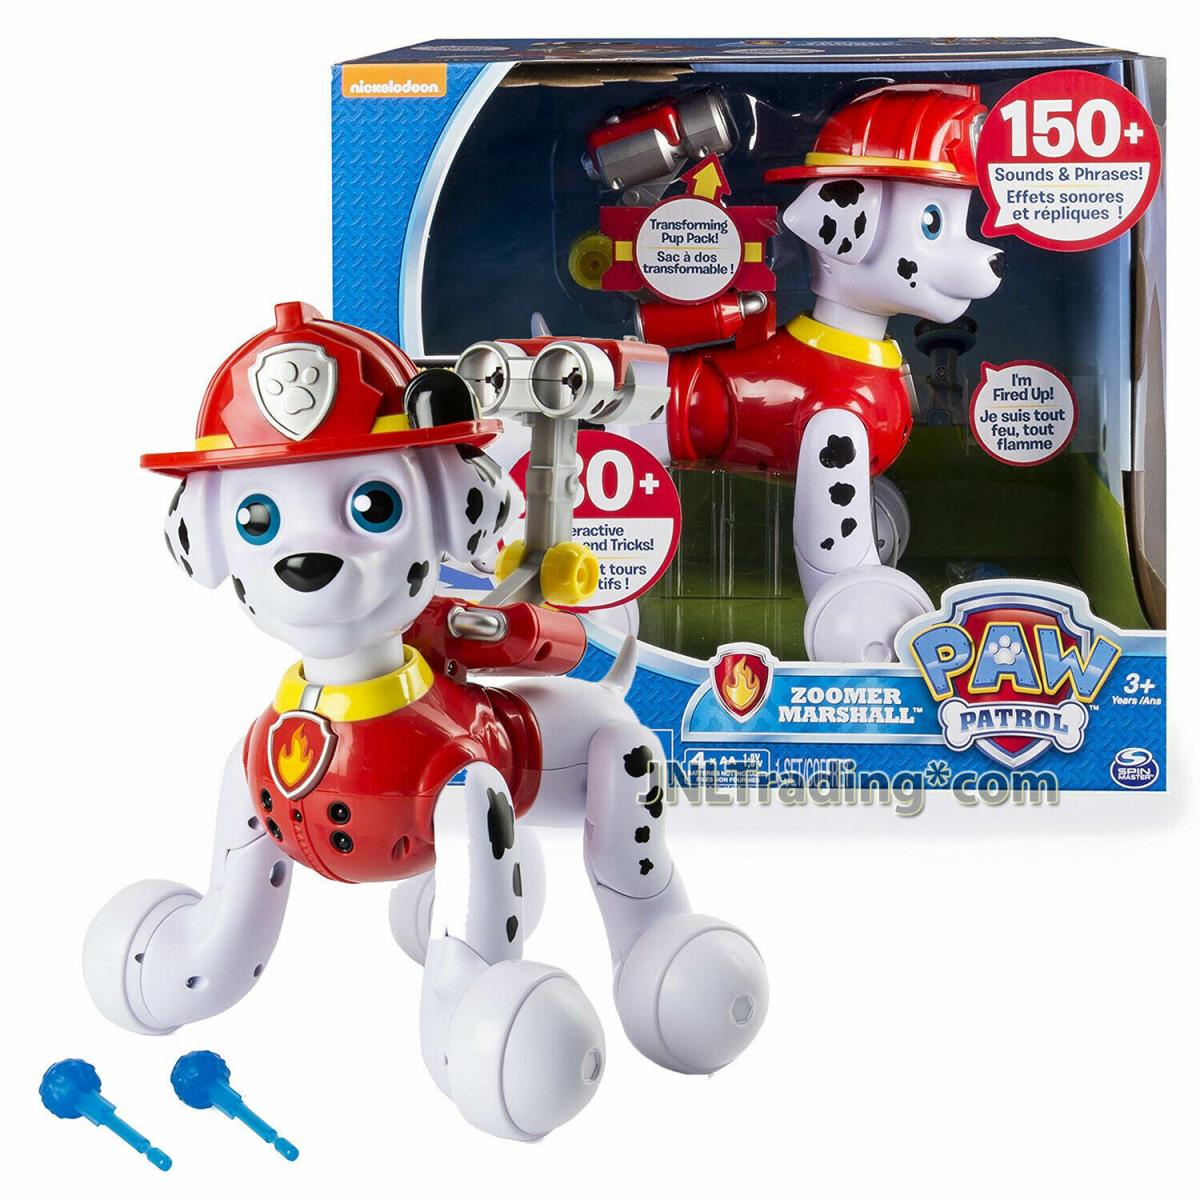 Zoomer Marshall Paw Patrol Fire Fighters Robot Toy Dog Cao Spin Master Brinquedo - Multicolor